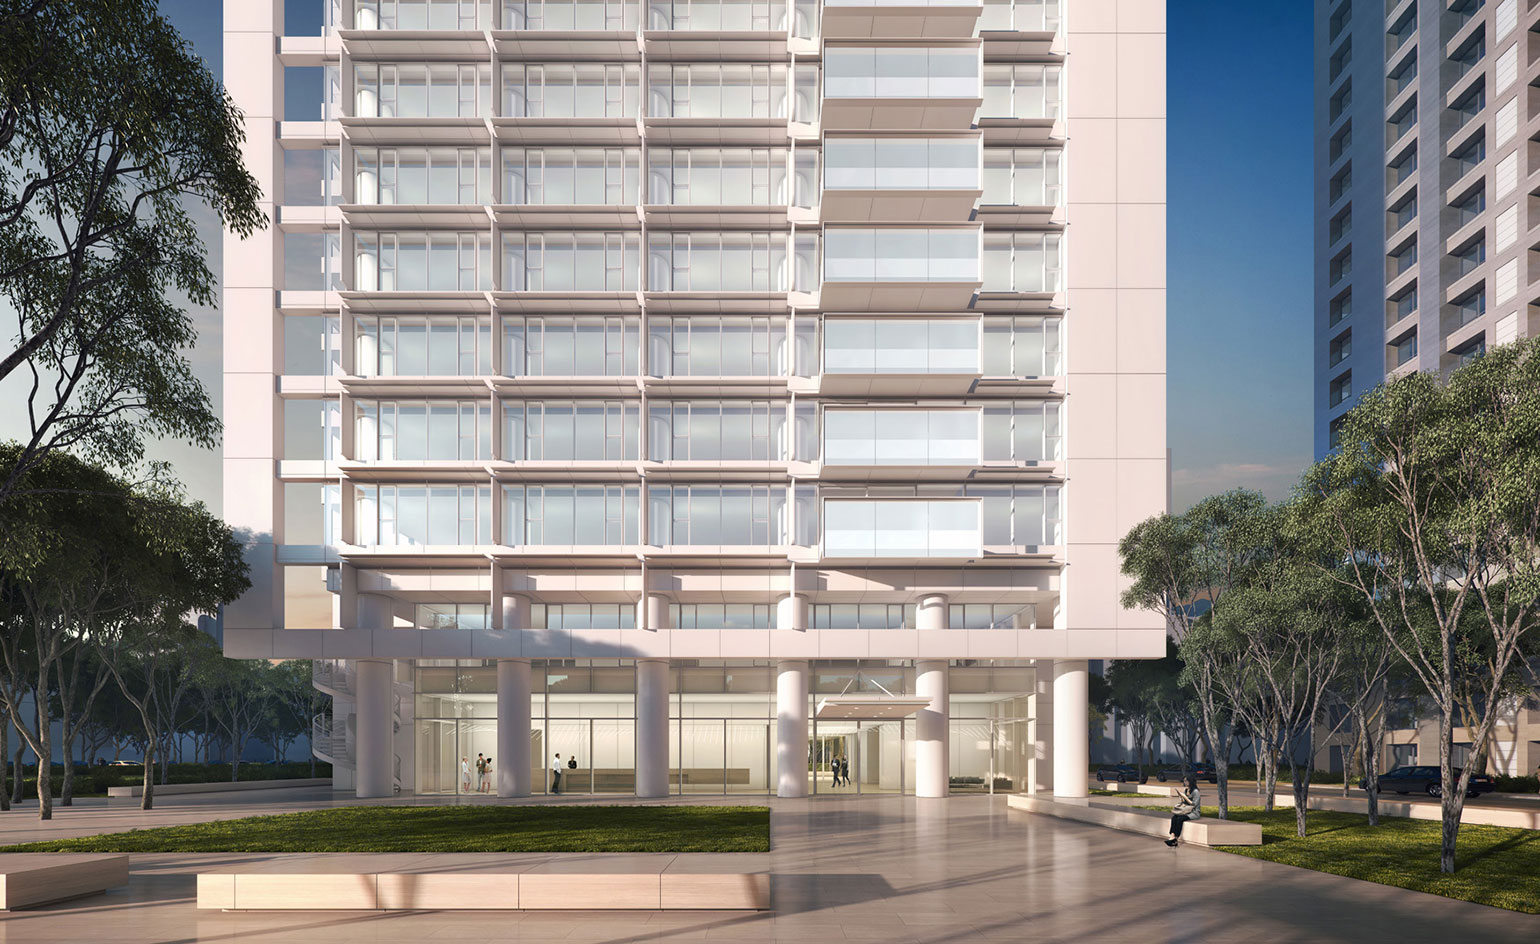 Sky high: we reveal Richard Meier's first residential tower in Taipei